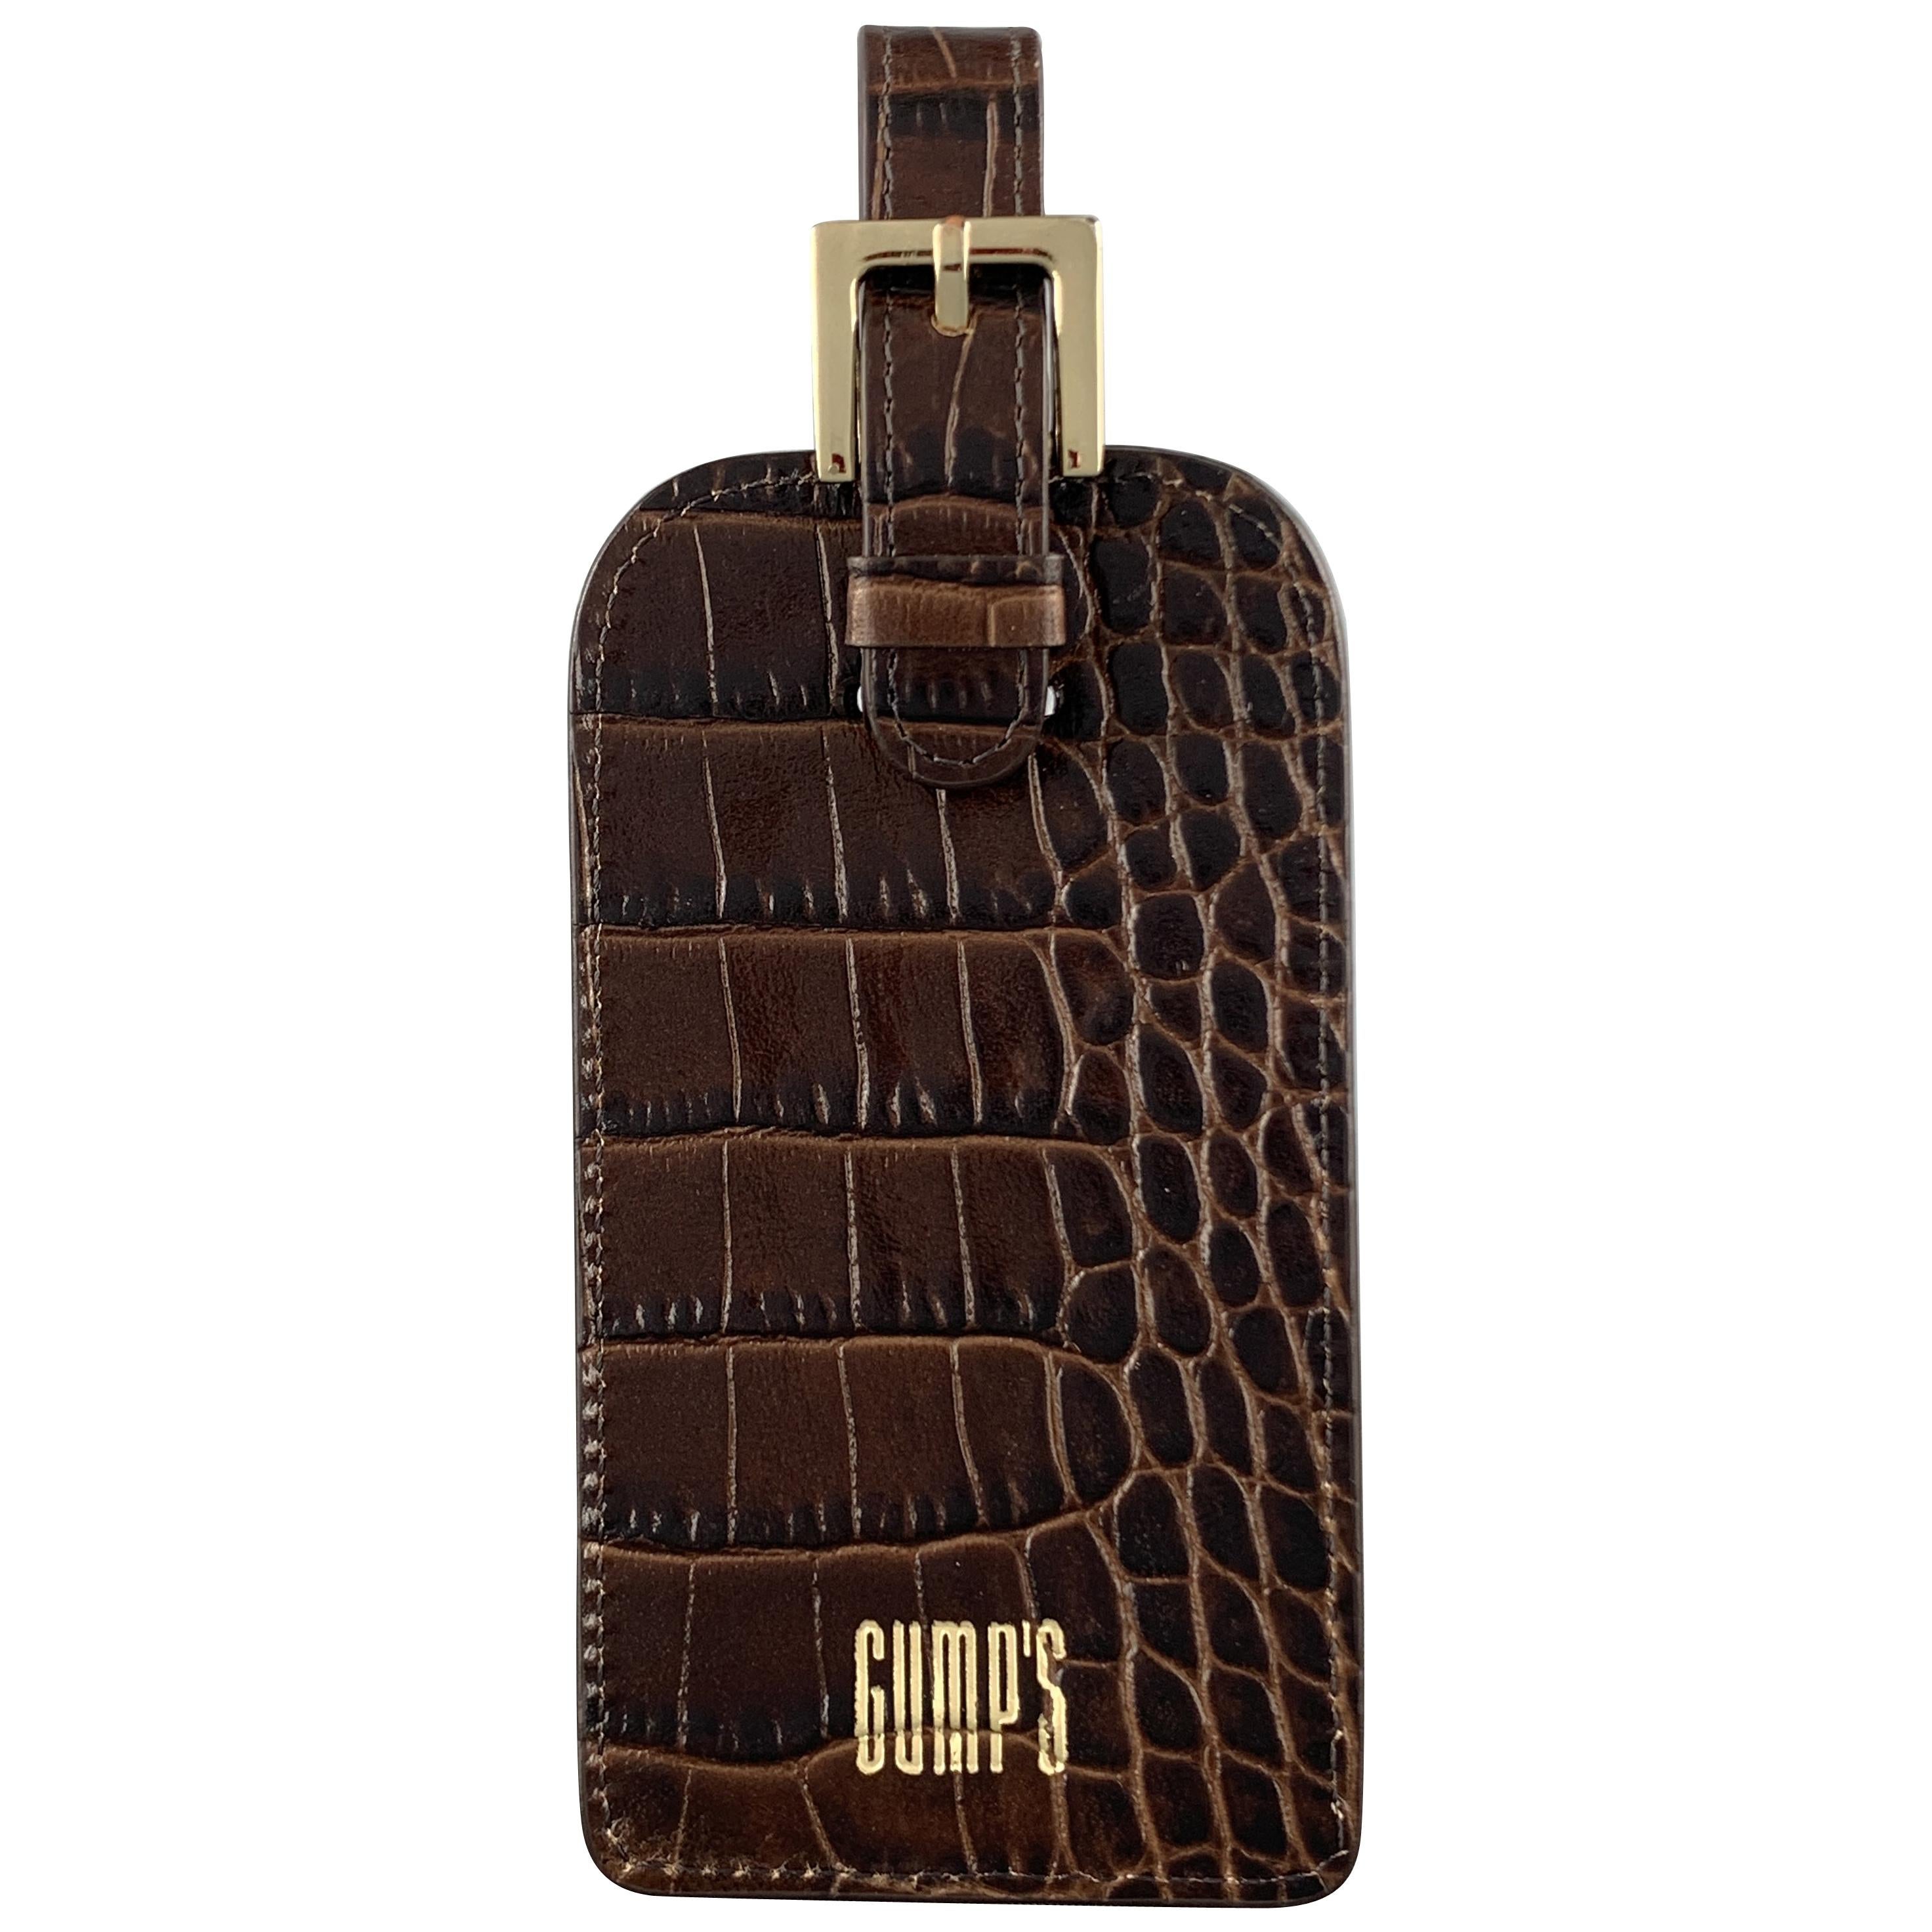 GUMP'S Embossed Alligator Brown Leather Luggage Tags